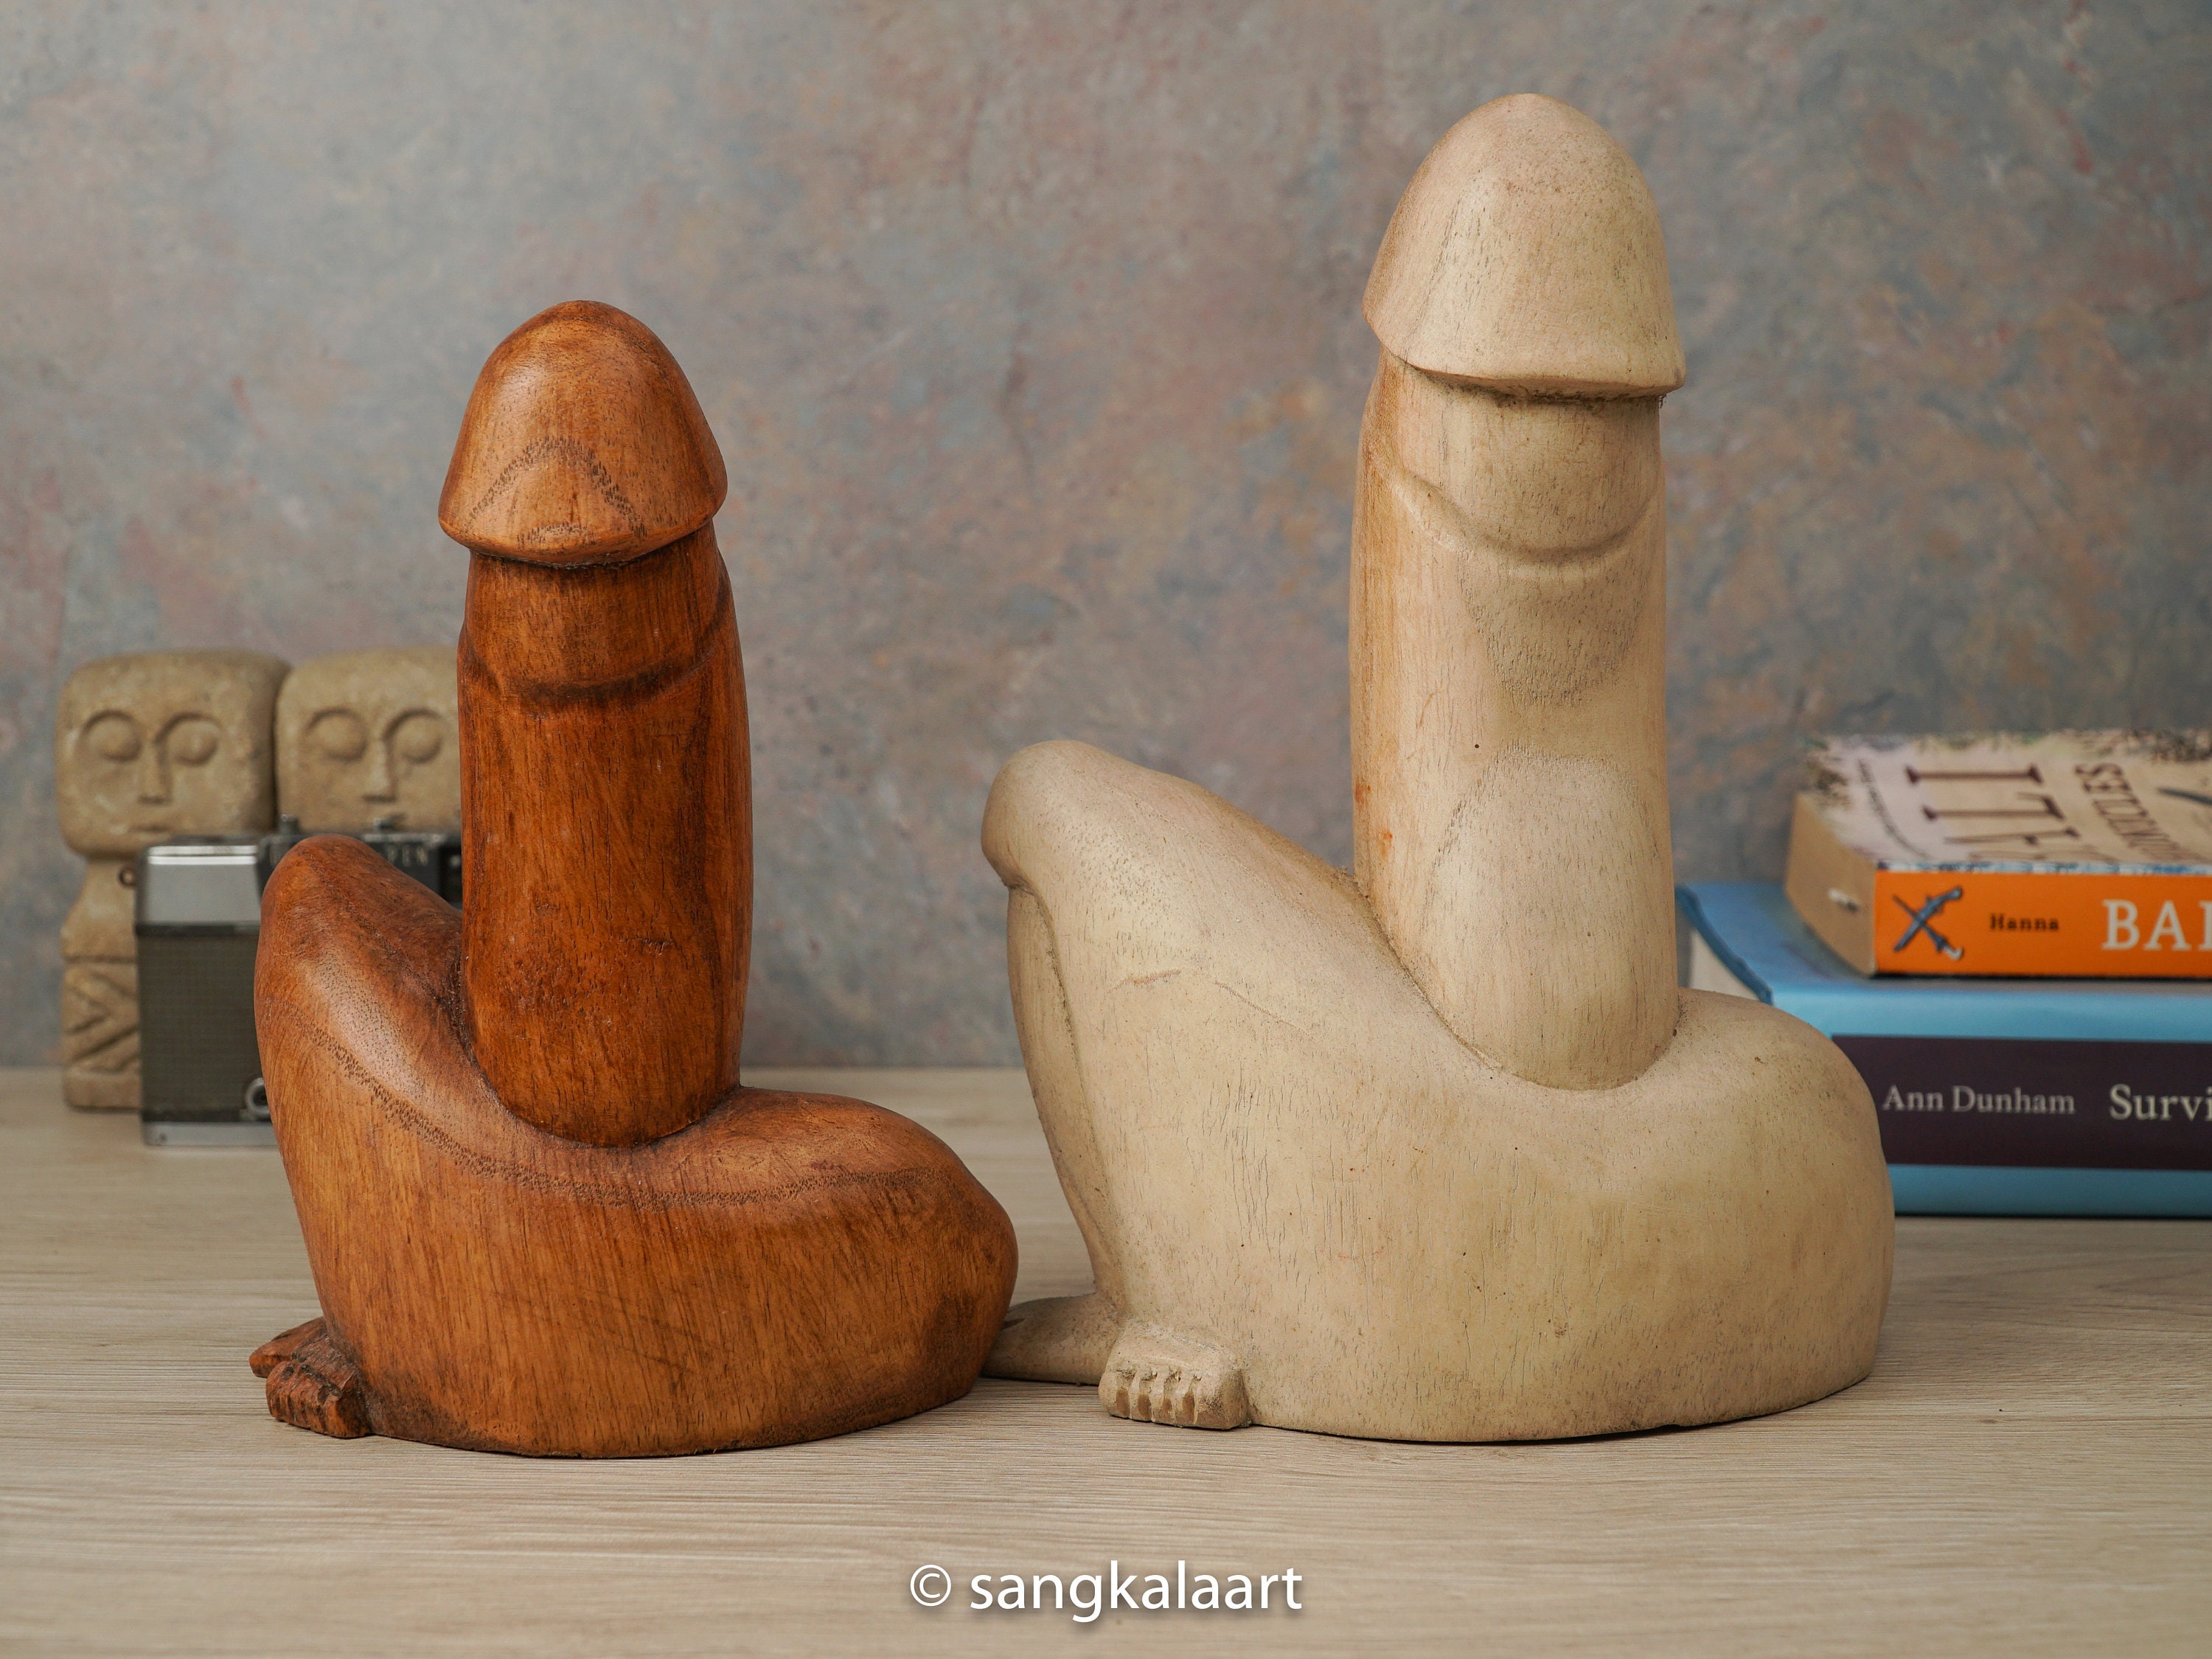 18 MATURE Wooden Standing Penis / Wooden Penis / Hand Carved Penis / Wood  Carving 